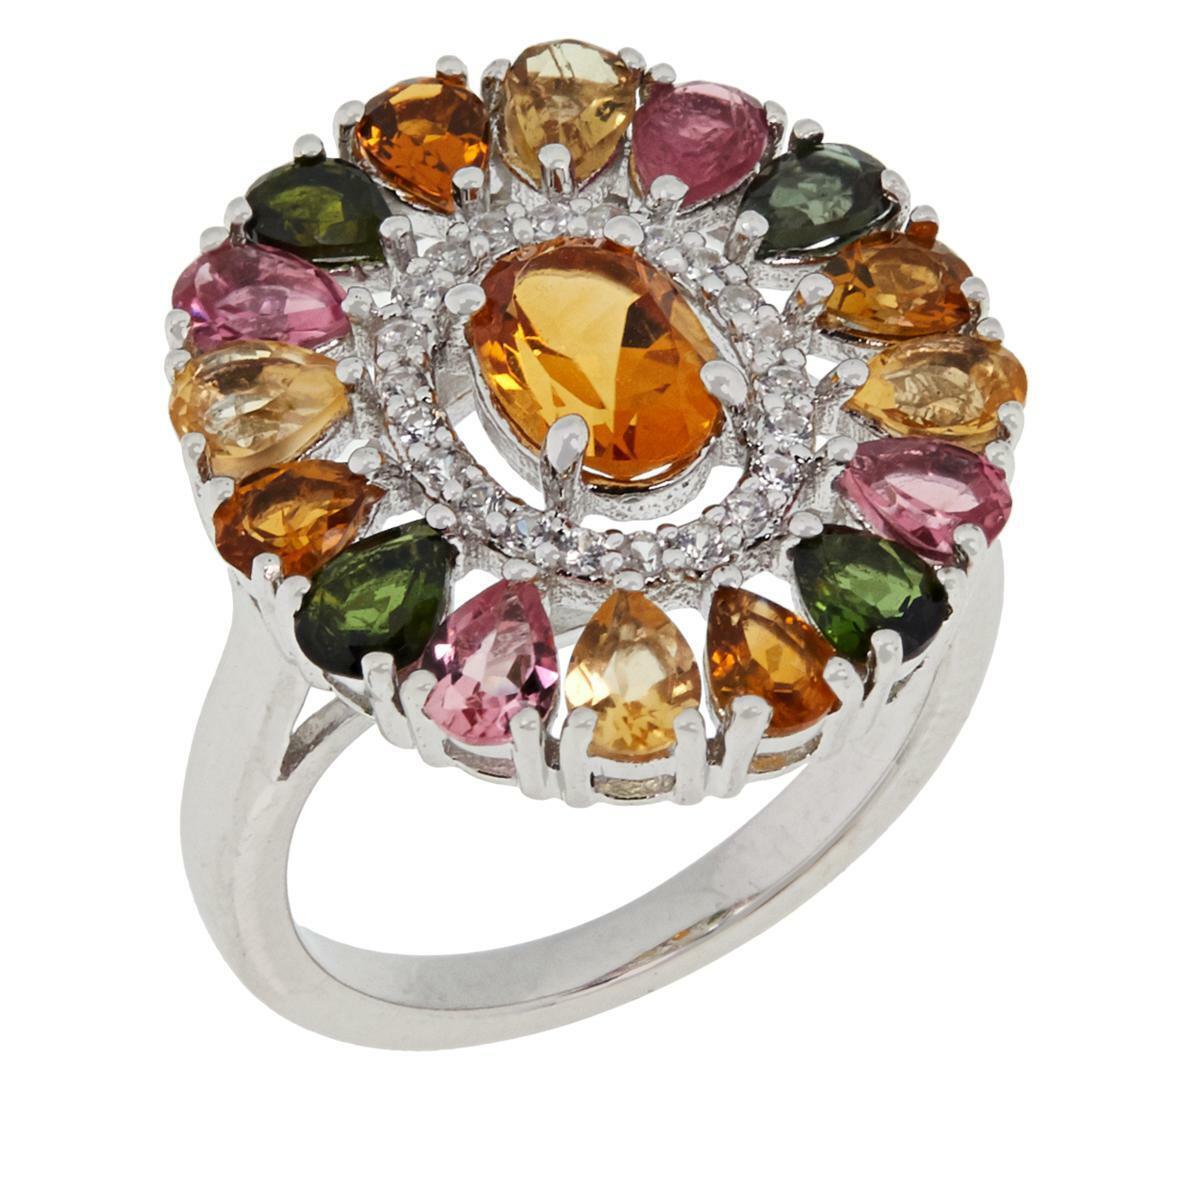 Colleen Lopez Sterling Silver Citrine and Multi Tourmaline Ring, Size 7